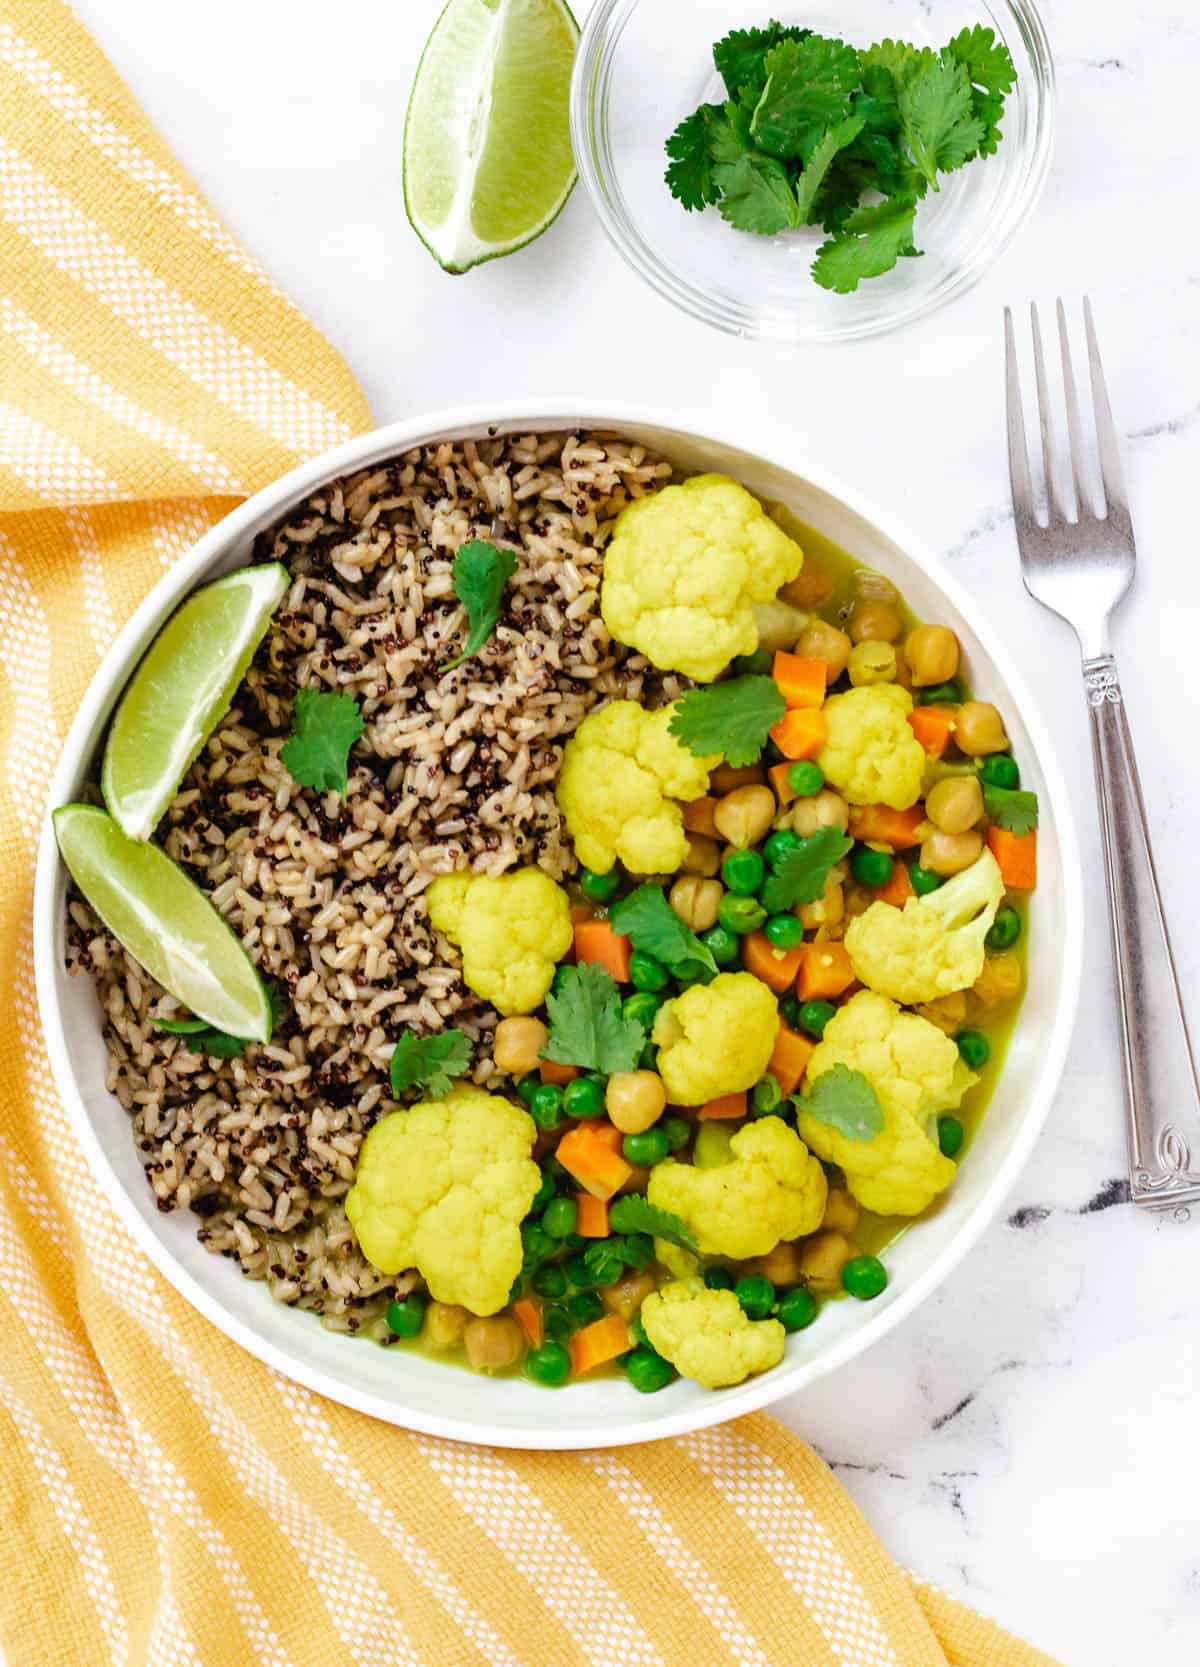 cauliflower curry with peas, carrots, and chickpeas served with rice and a wedge of lime